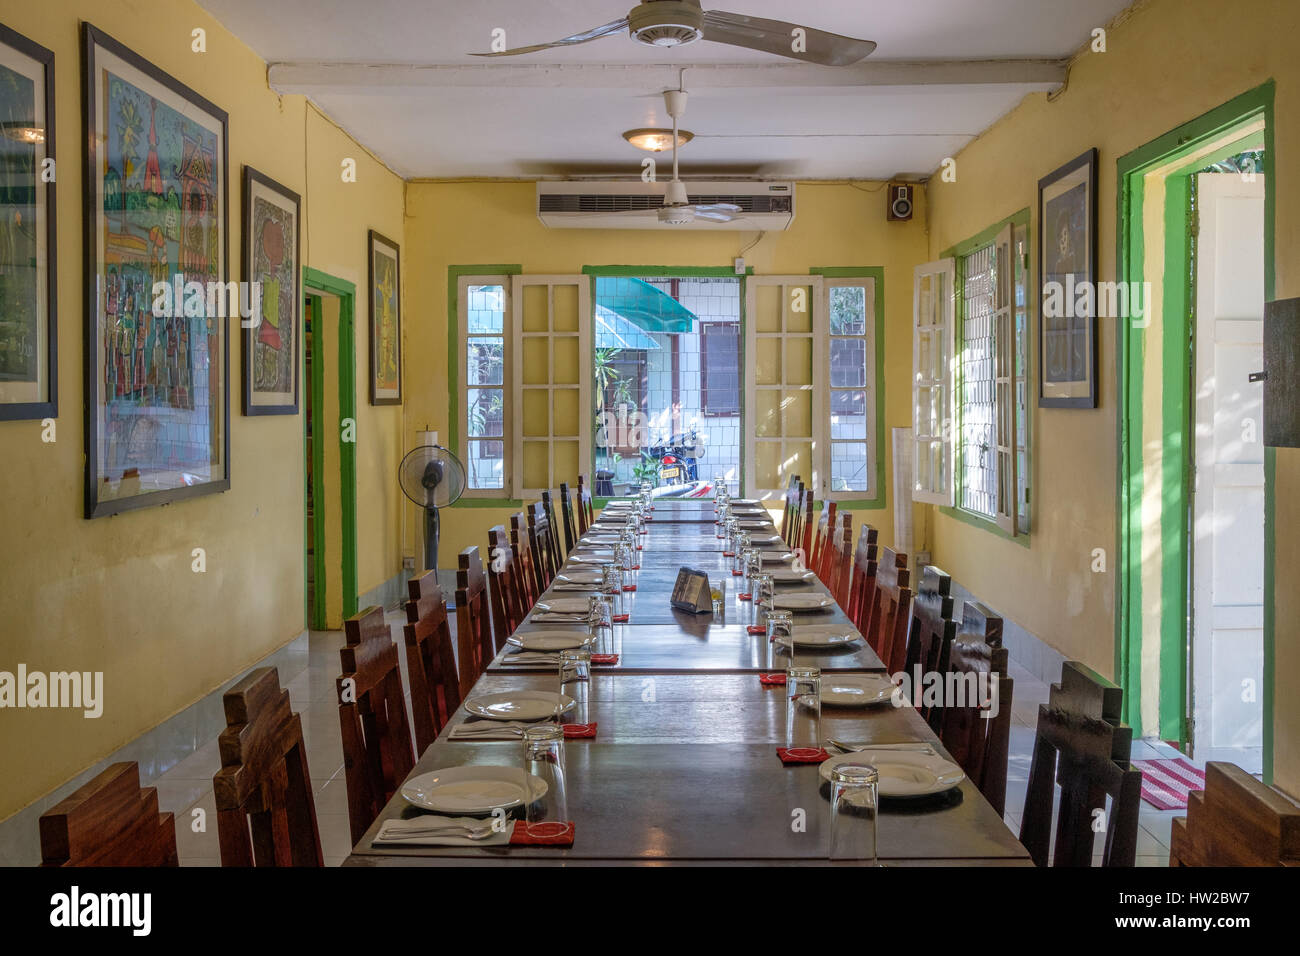 French colonial style interior in Vientiane, Laos Stock Photo